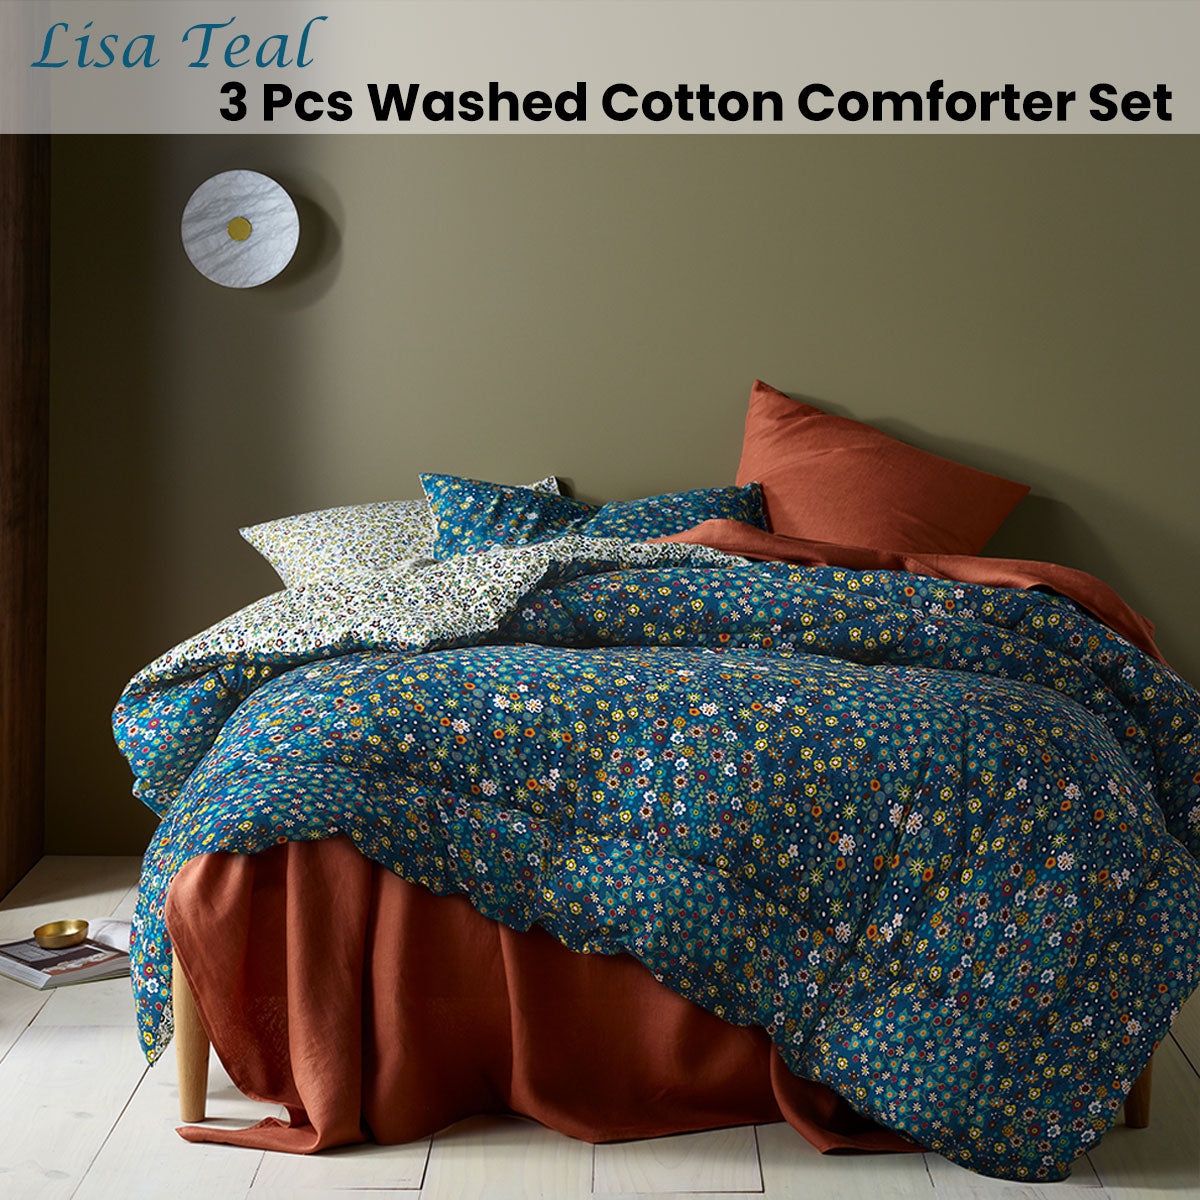 Accessorize Lisa Teal Washed Cotton Printed 3 Piece Comforter Set Queen